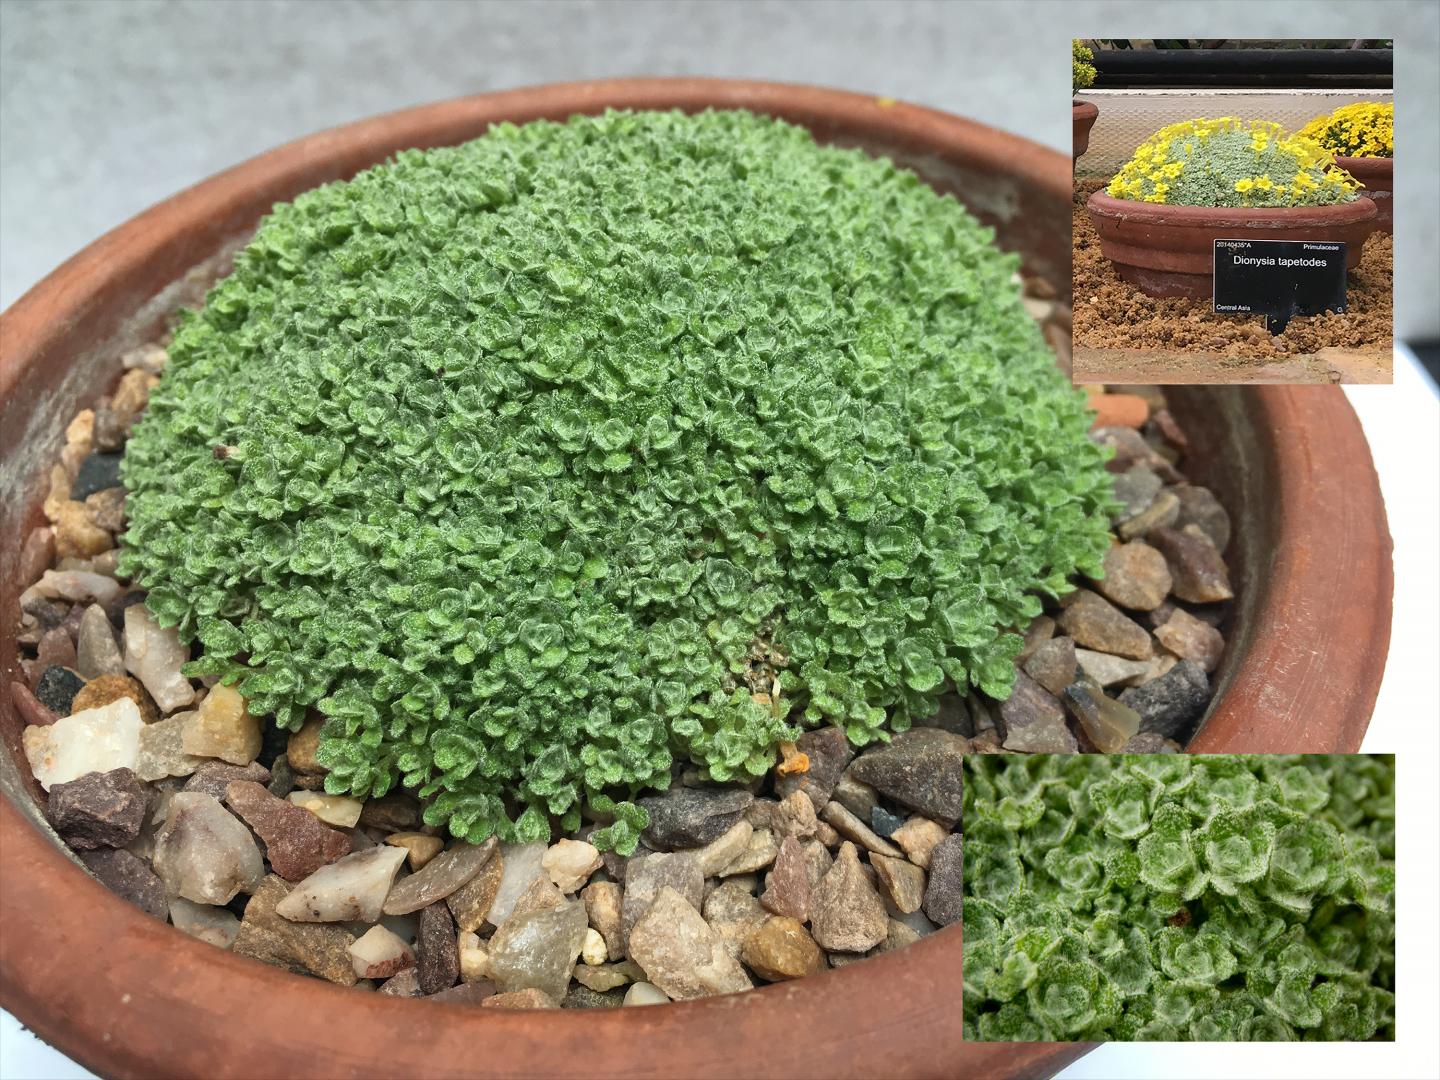 Dionysia tapetodes, an alpine plant in the primula family with yellow flowers, makes its own wool-like substance. 